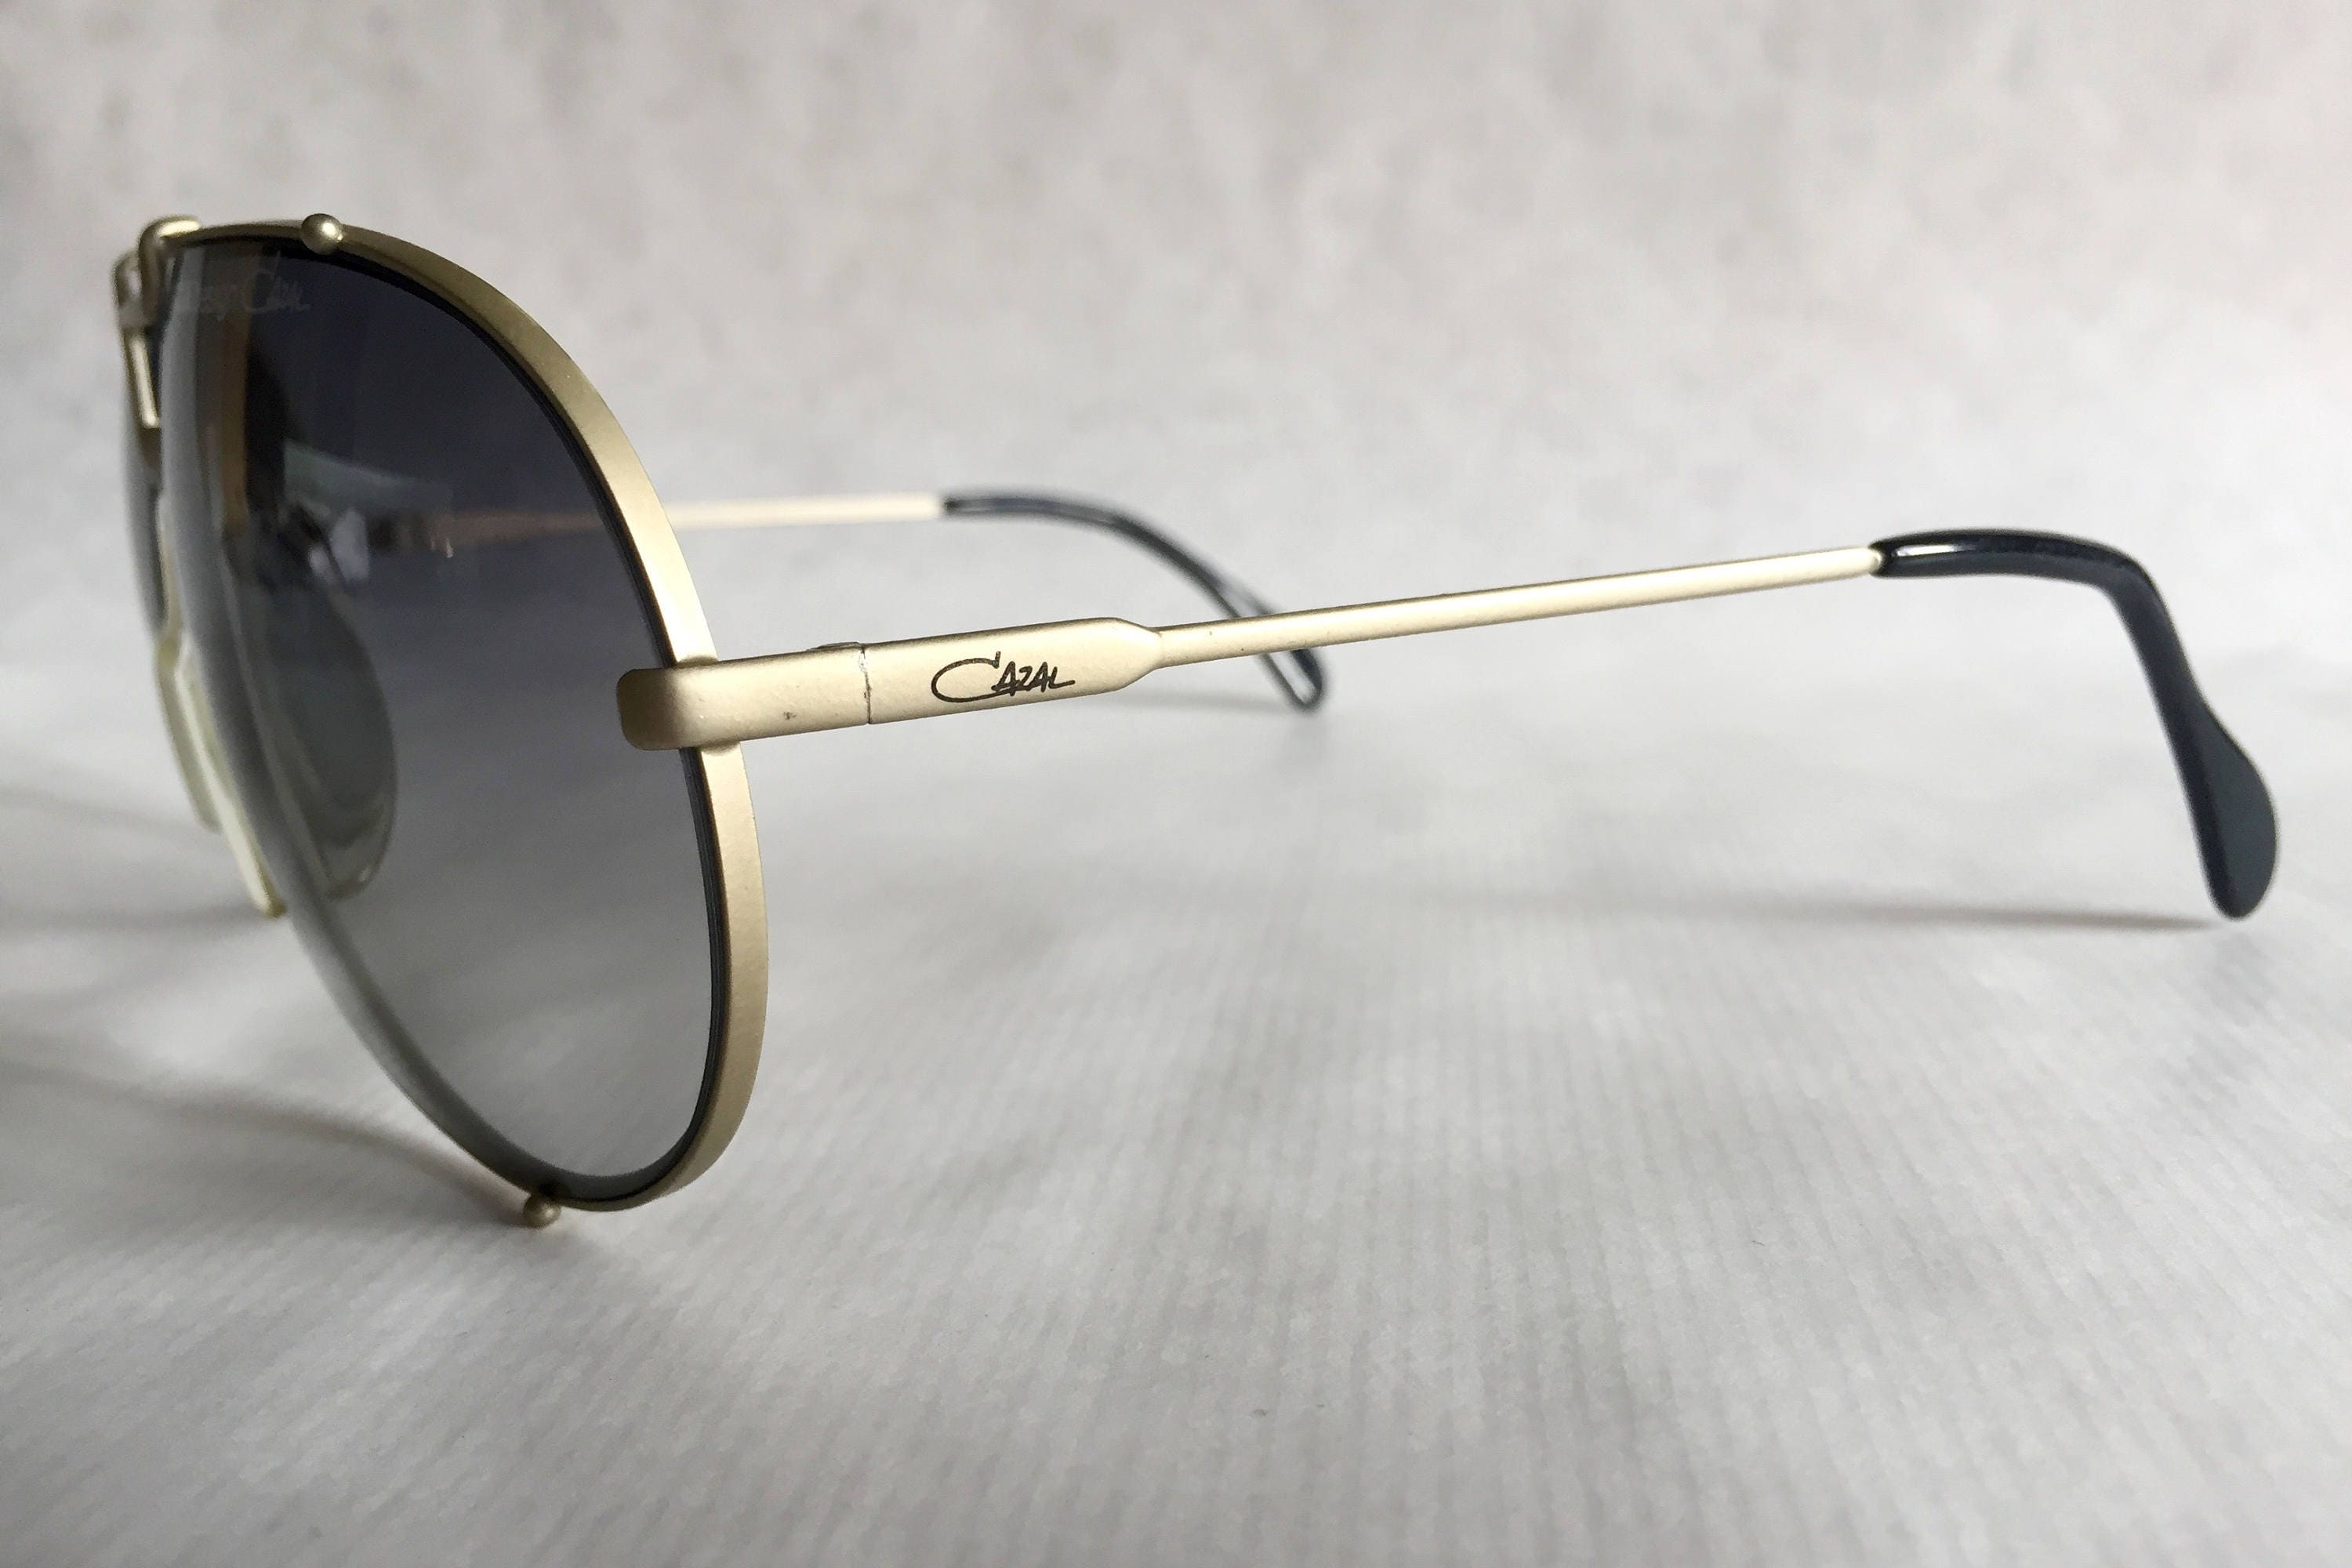 Reserved for Bill Dalosis /// Cazal 901 Col 56 Vintage Sunglasses NOS ...